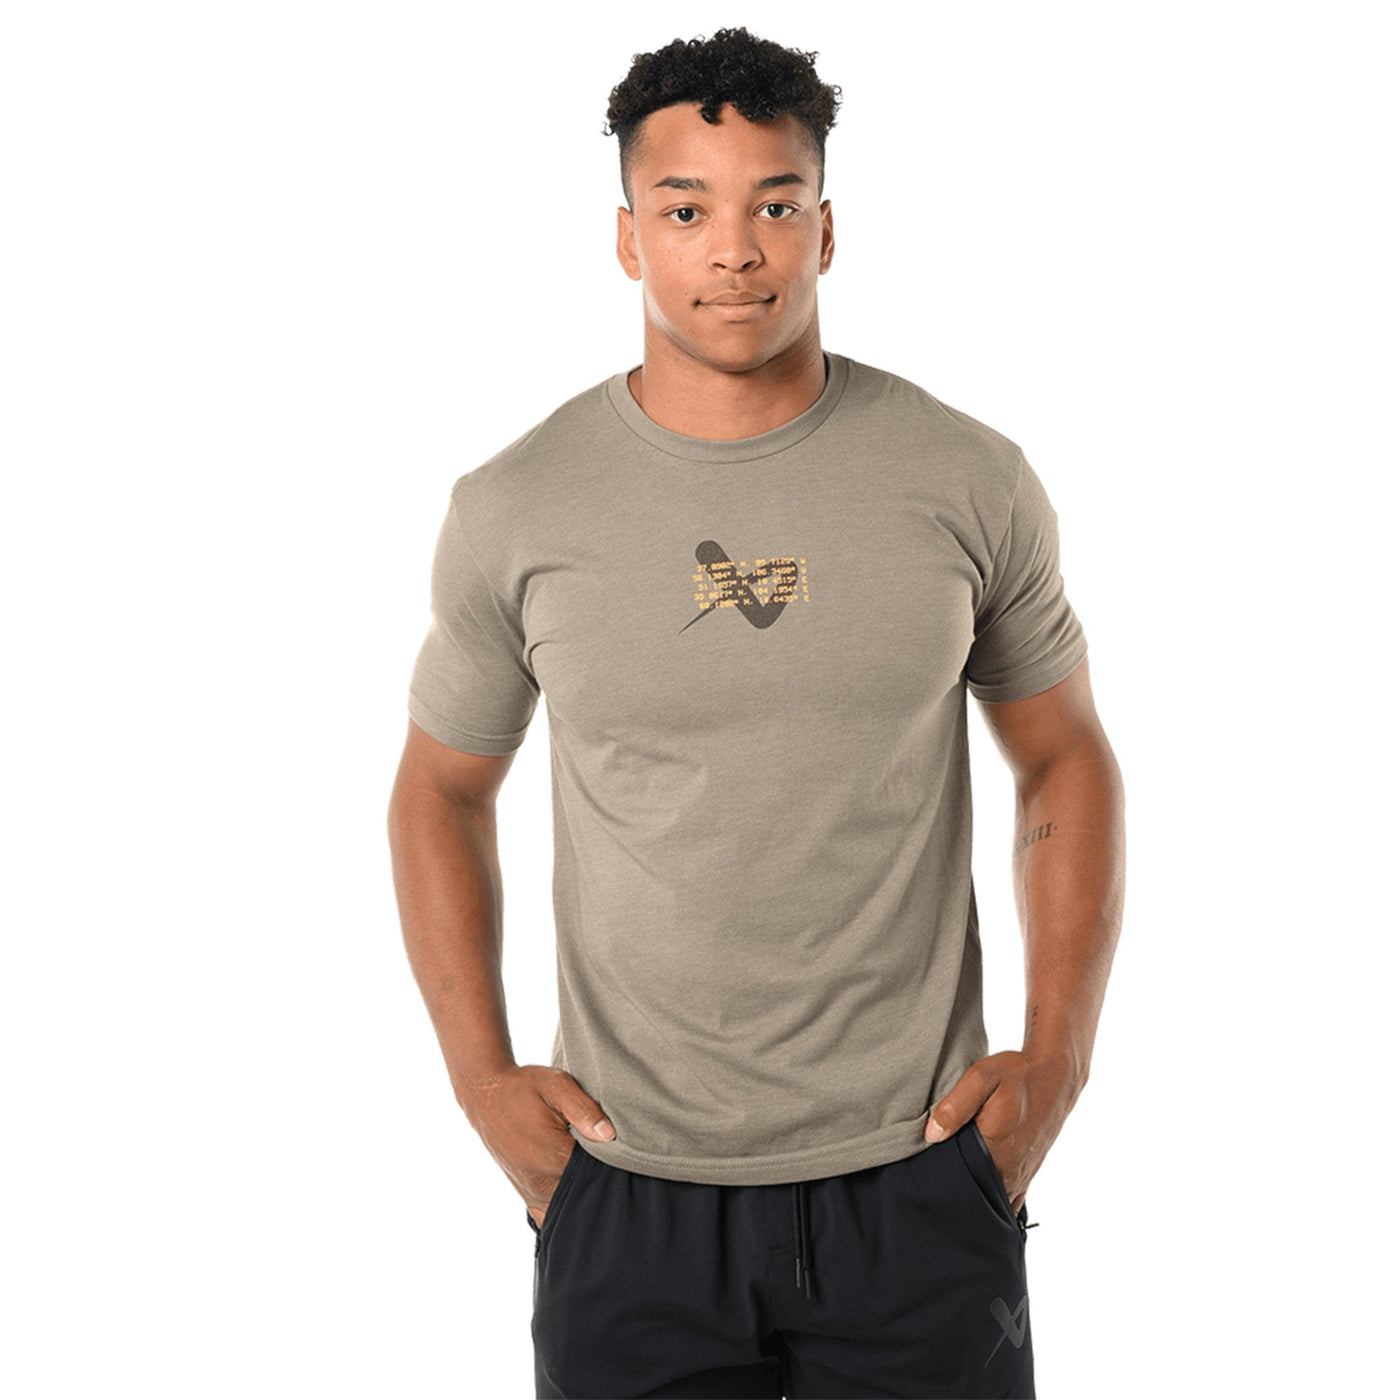 Bauer Worldwide Shortsleeve Mens Shirt - Olive - The Hockey Shop Source For Sports